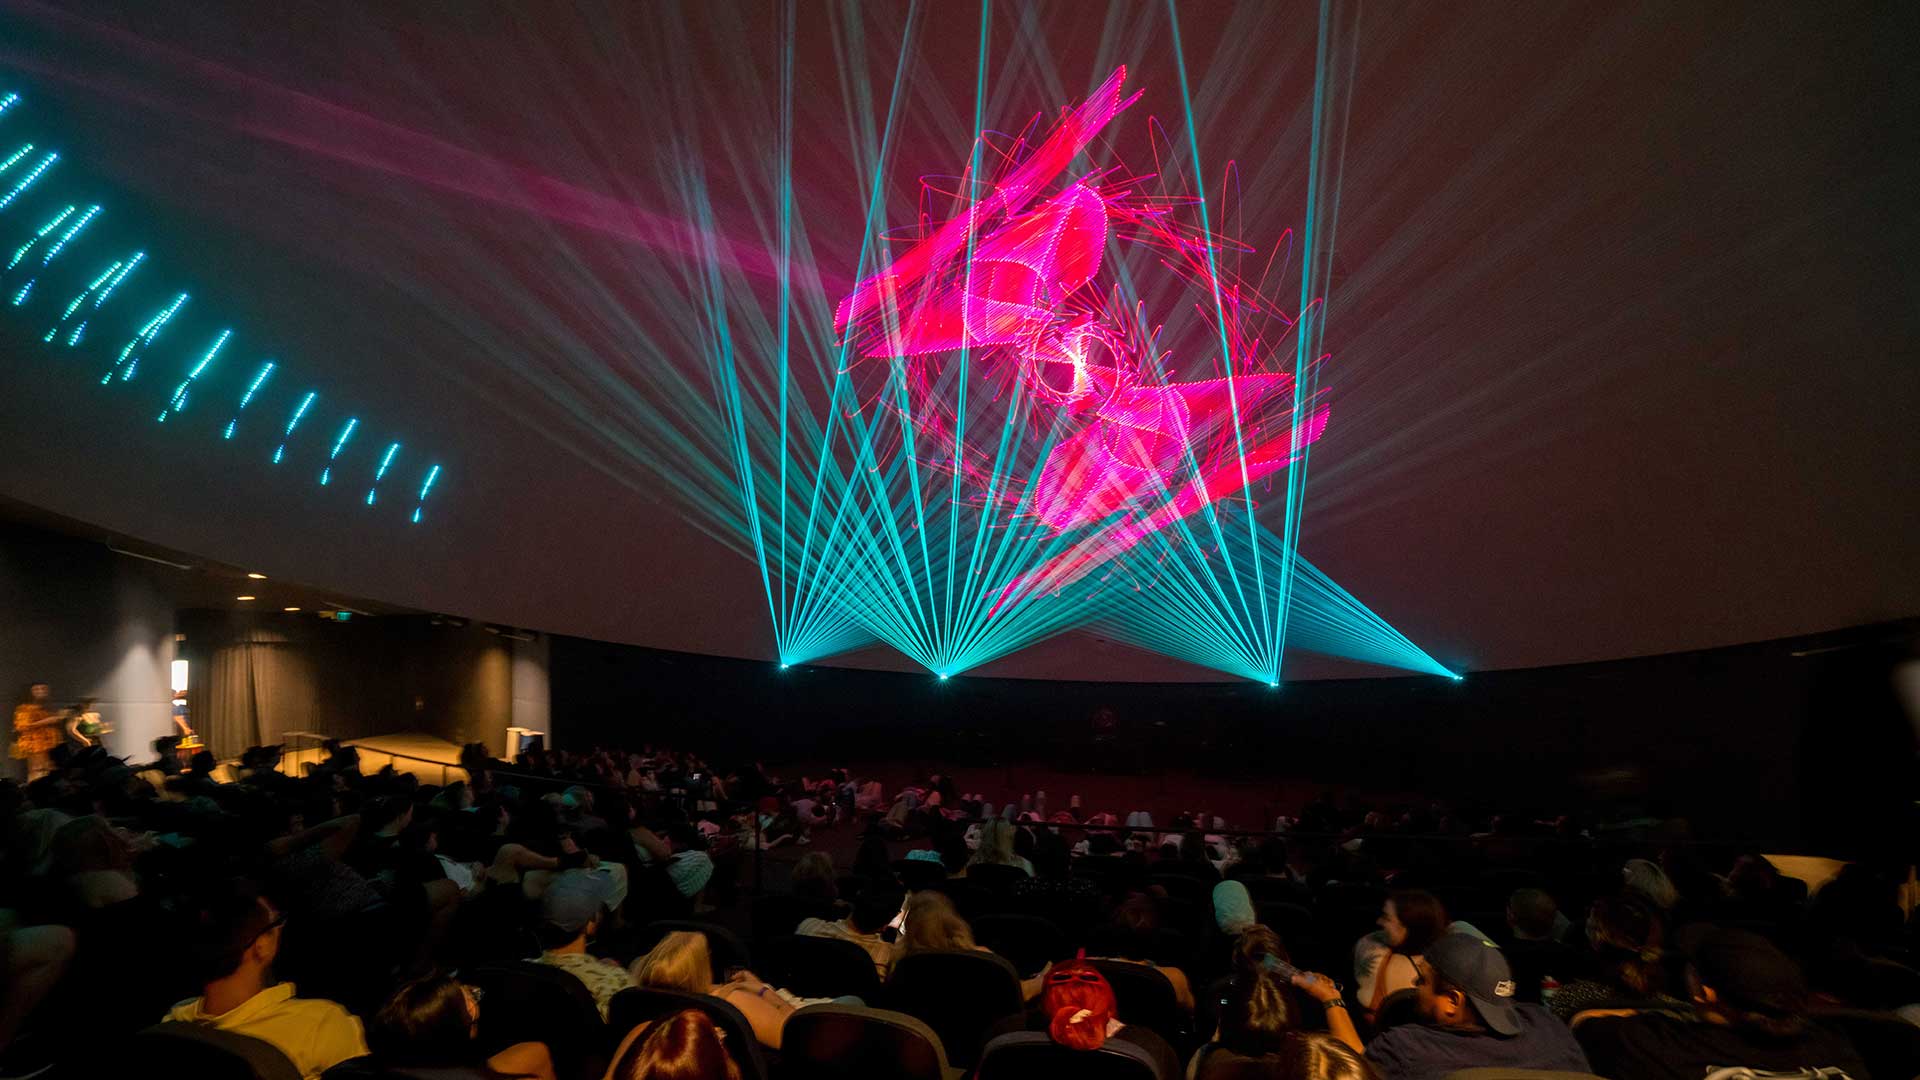 Audience attending Laser Dome shows during Happy Hour.